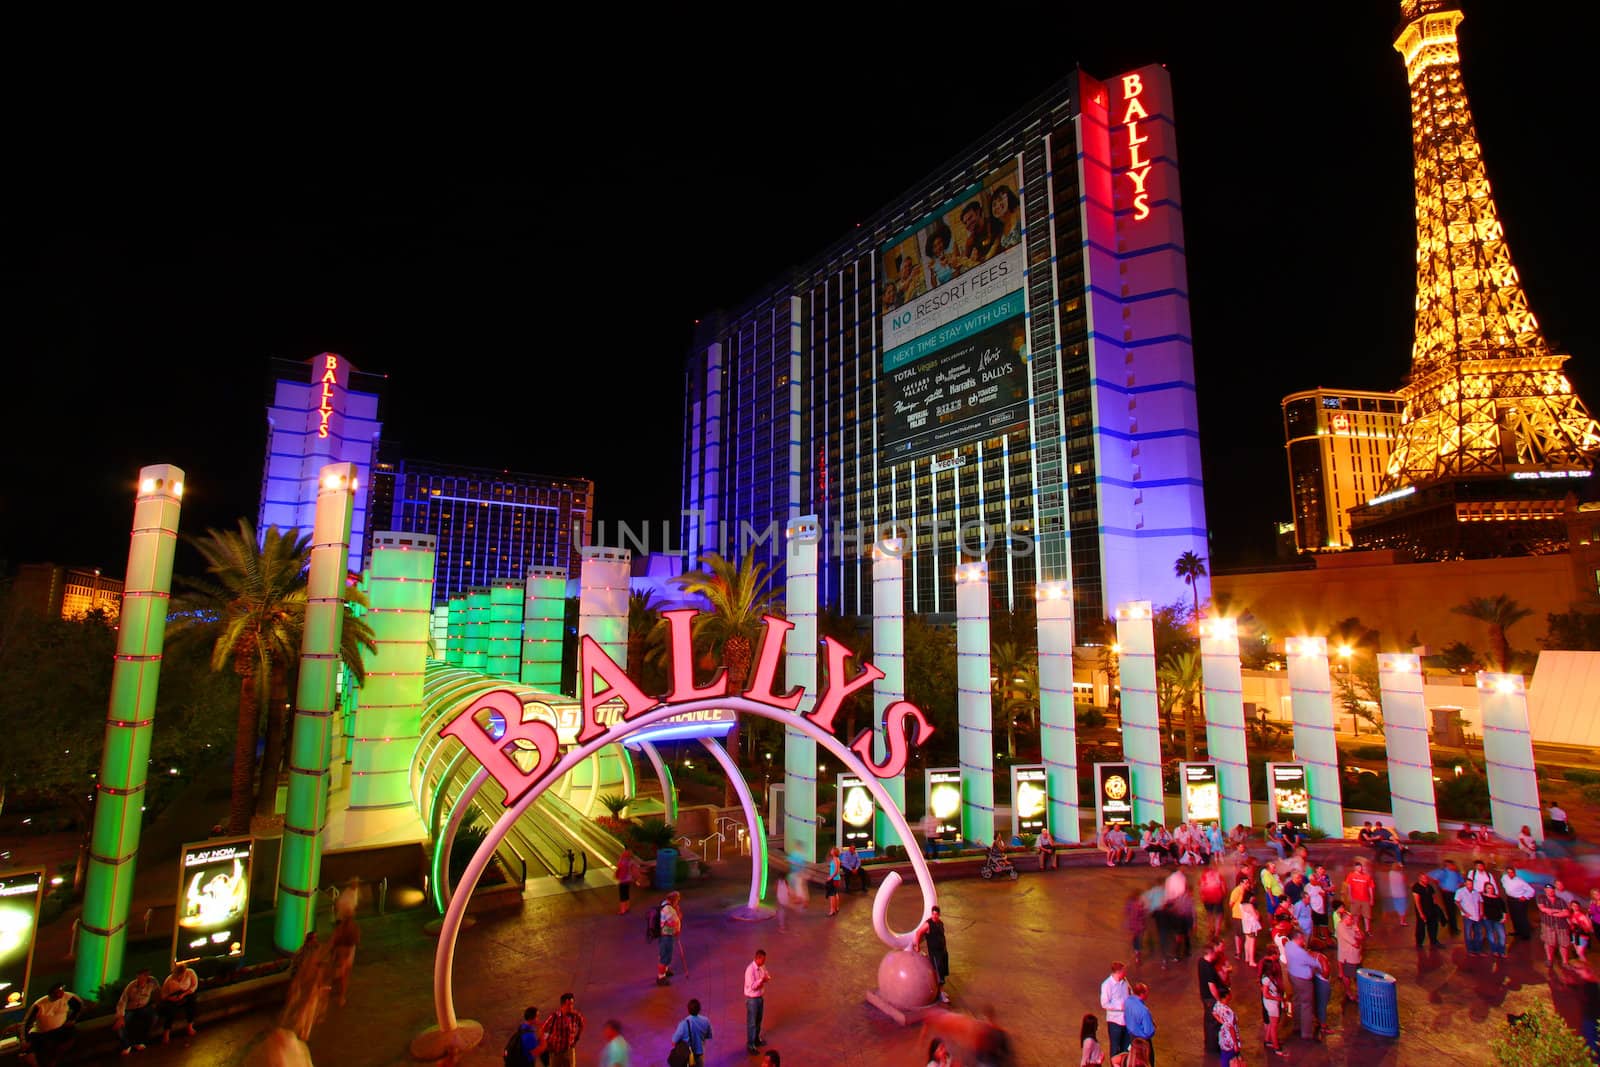 Las Vegas, USA - May 22, 2012: Bally's Las Vegas is a hotel and casino on the famous Las Vegas Strip.  Seen here is the entrance off Las Vegas Boulevard illuminated by colorful lighting.